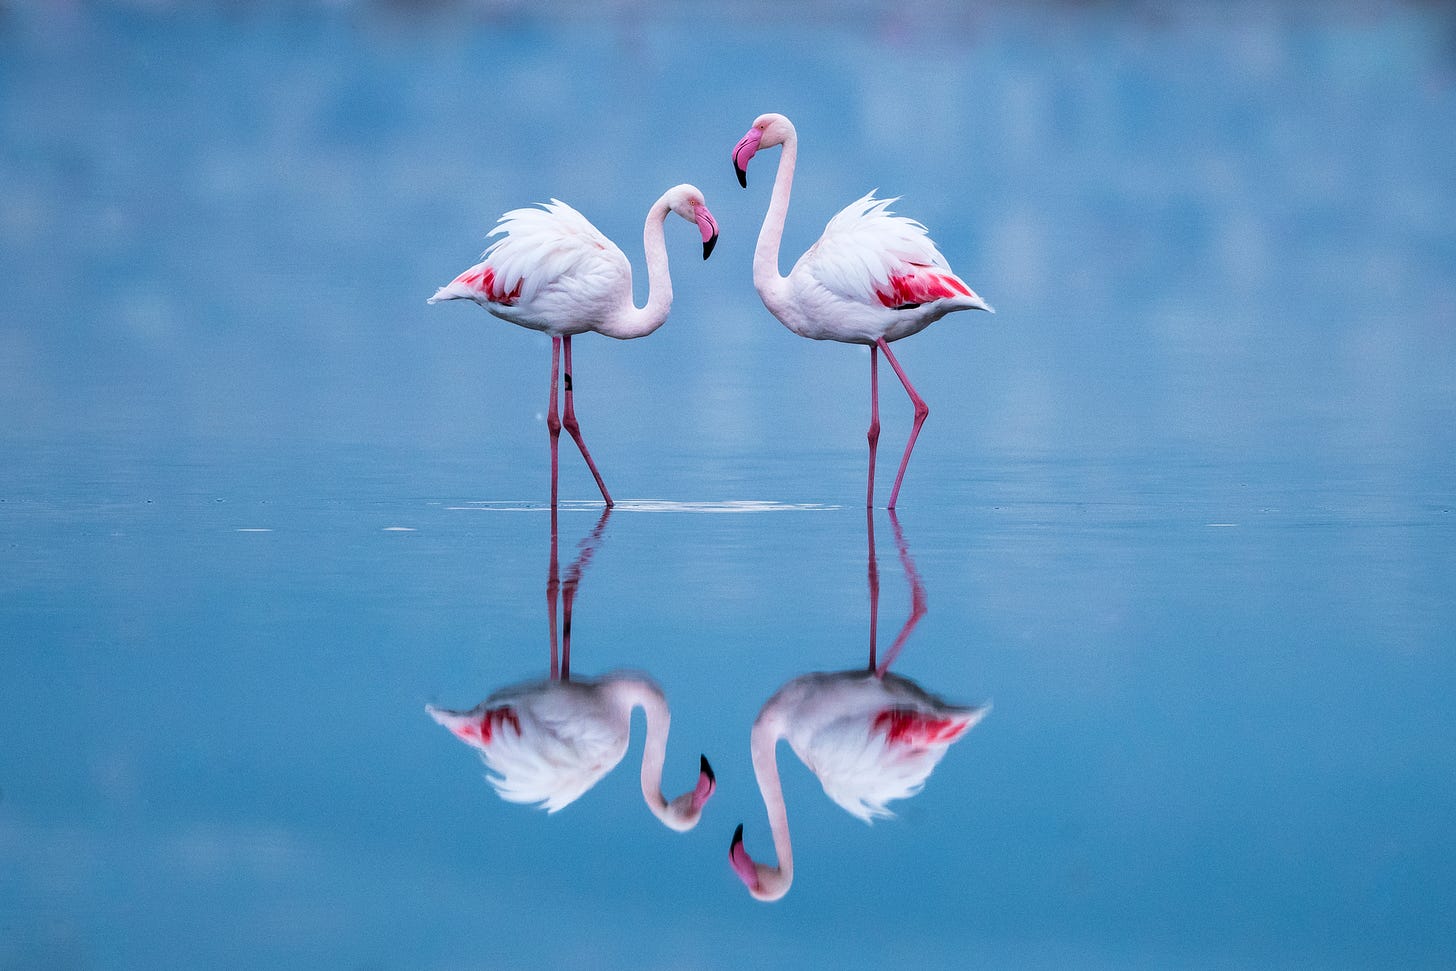 2 predominantly white flamingies wading in a pool with their reflections on the water underneath them